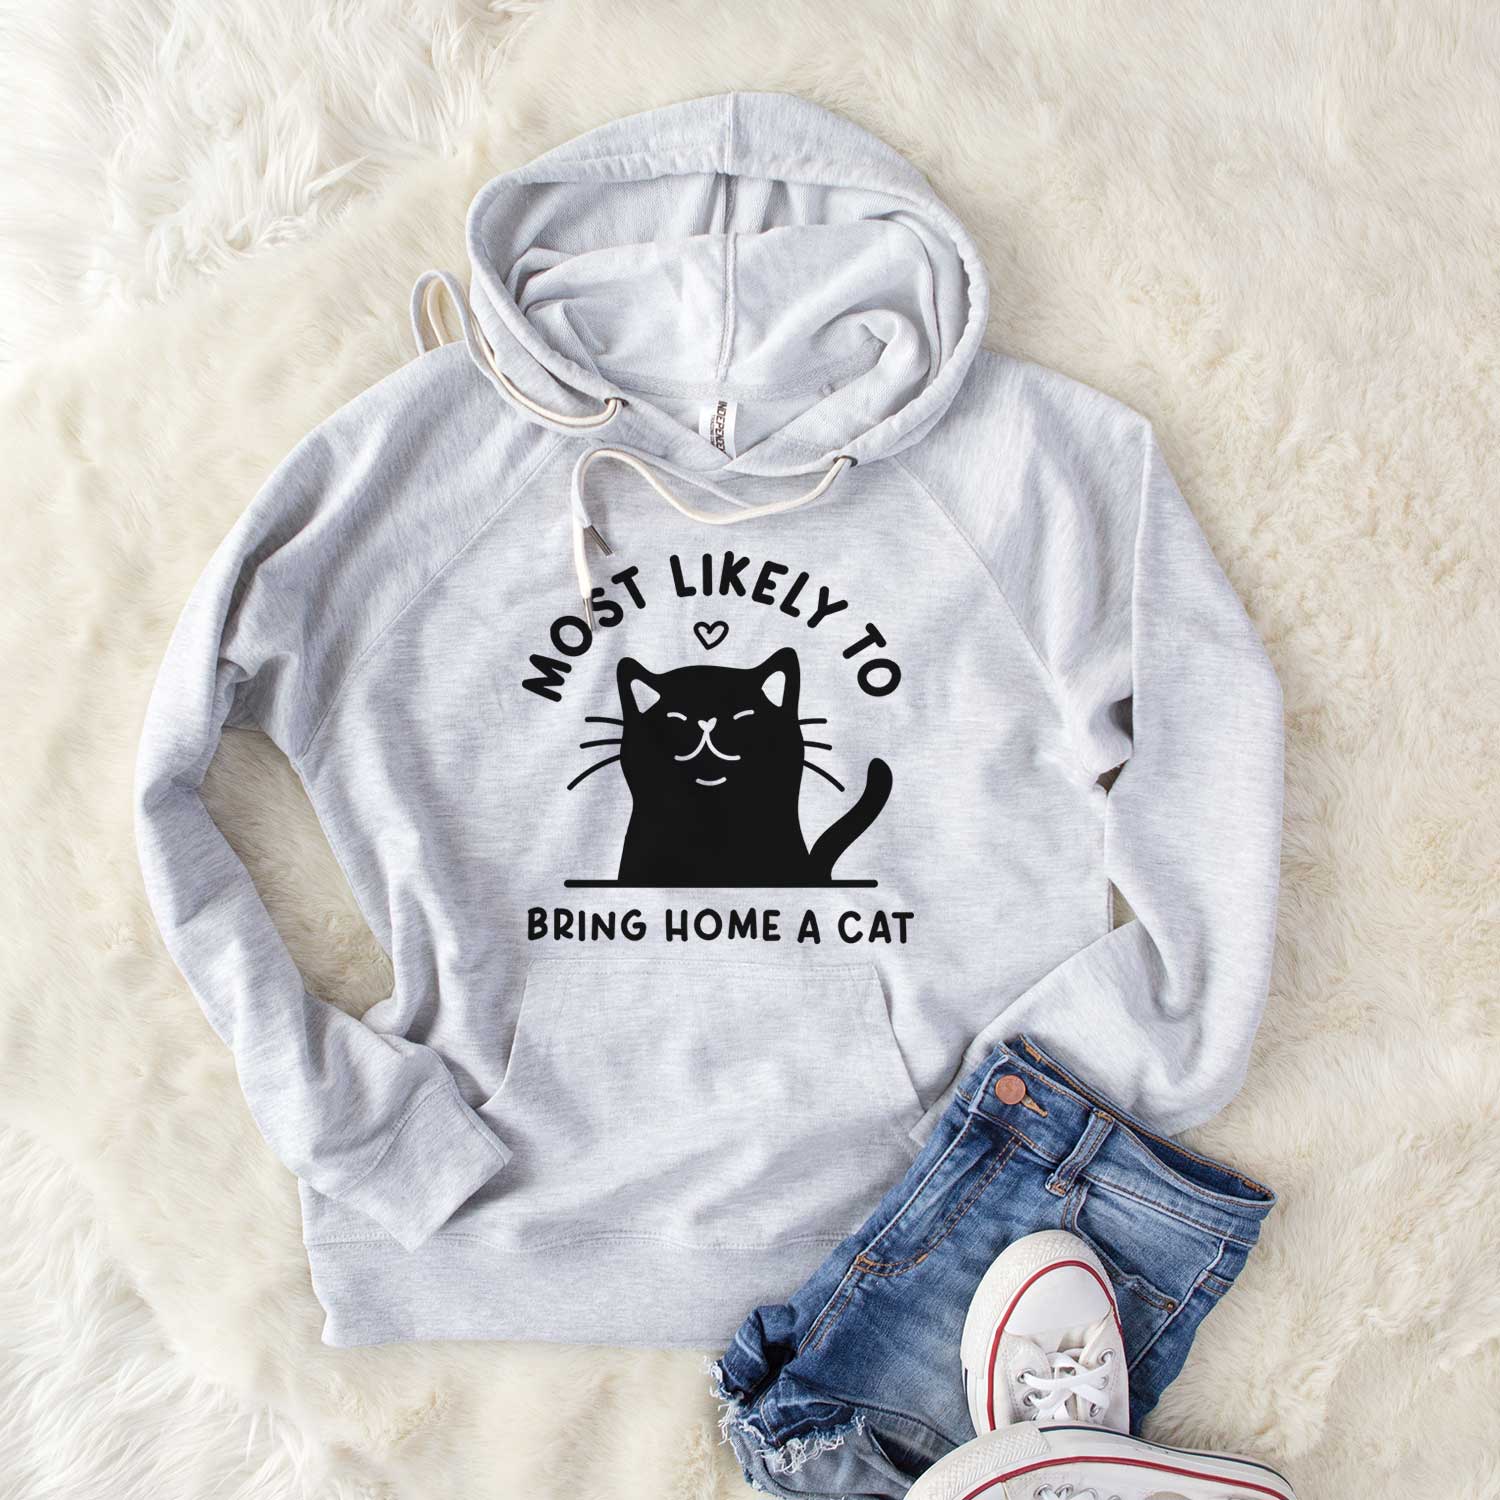 Most Likely to Bring Home a Cat - Black - Unisex Loopback Terry Hoodie